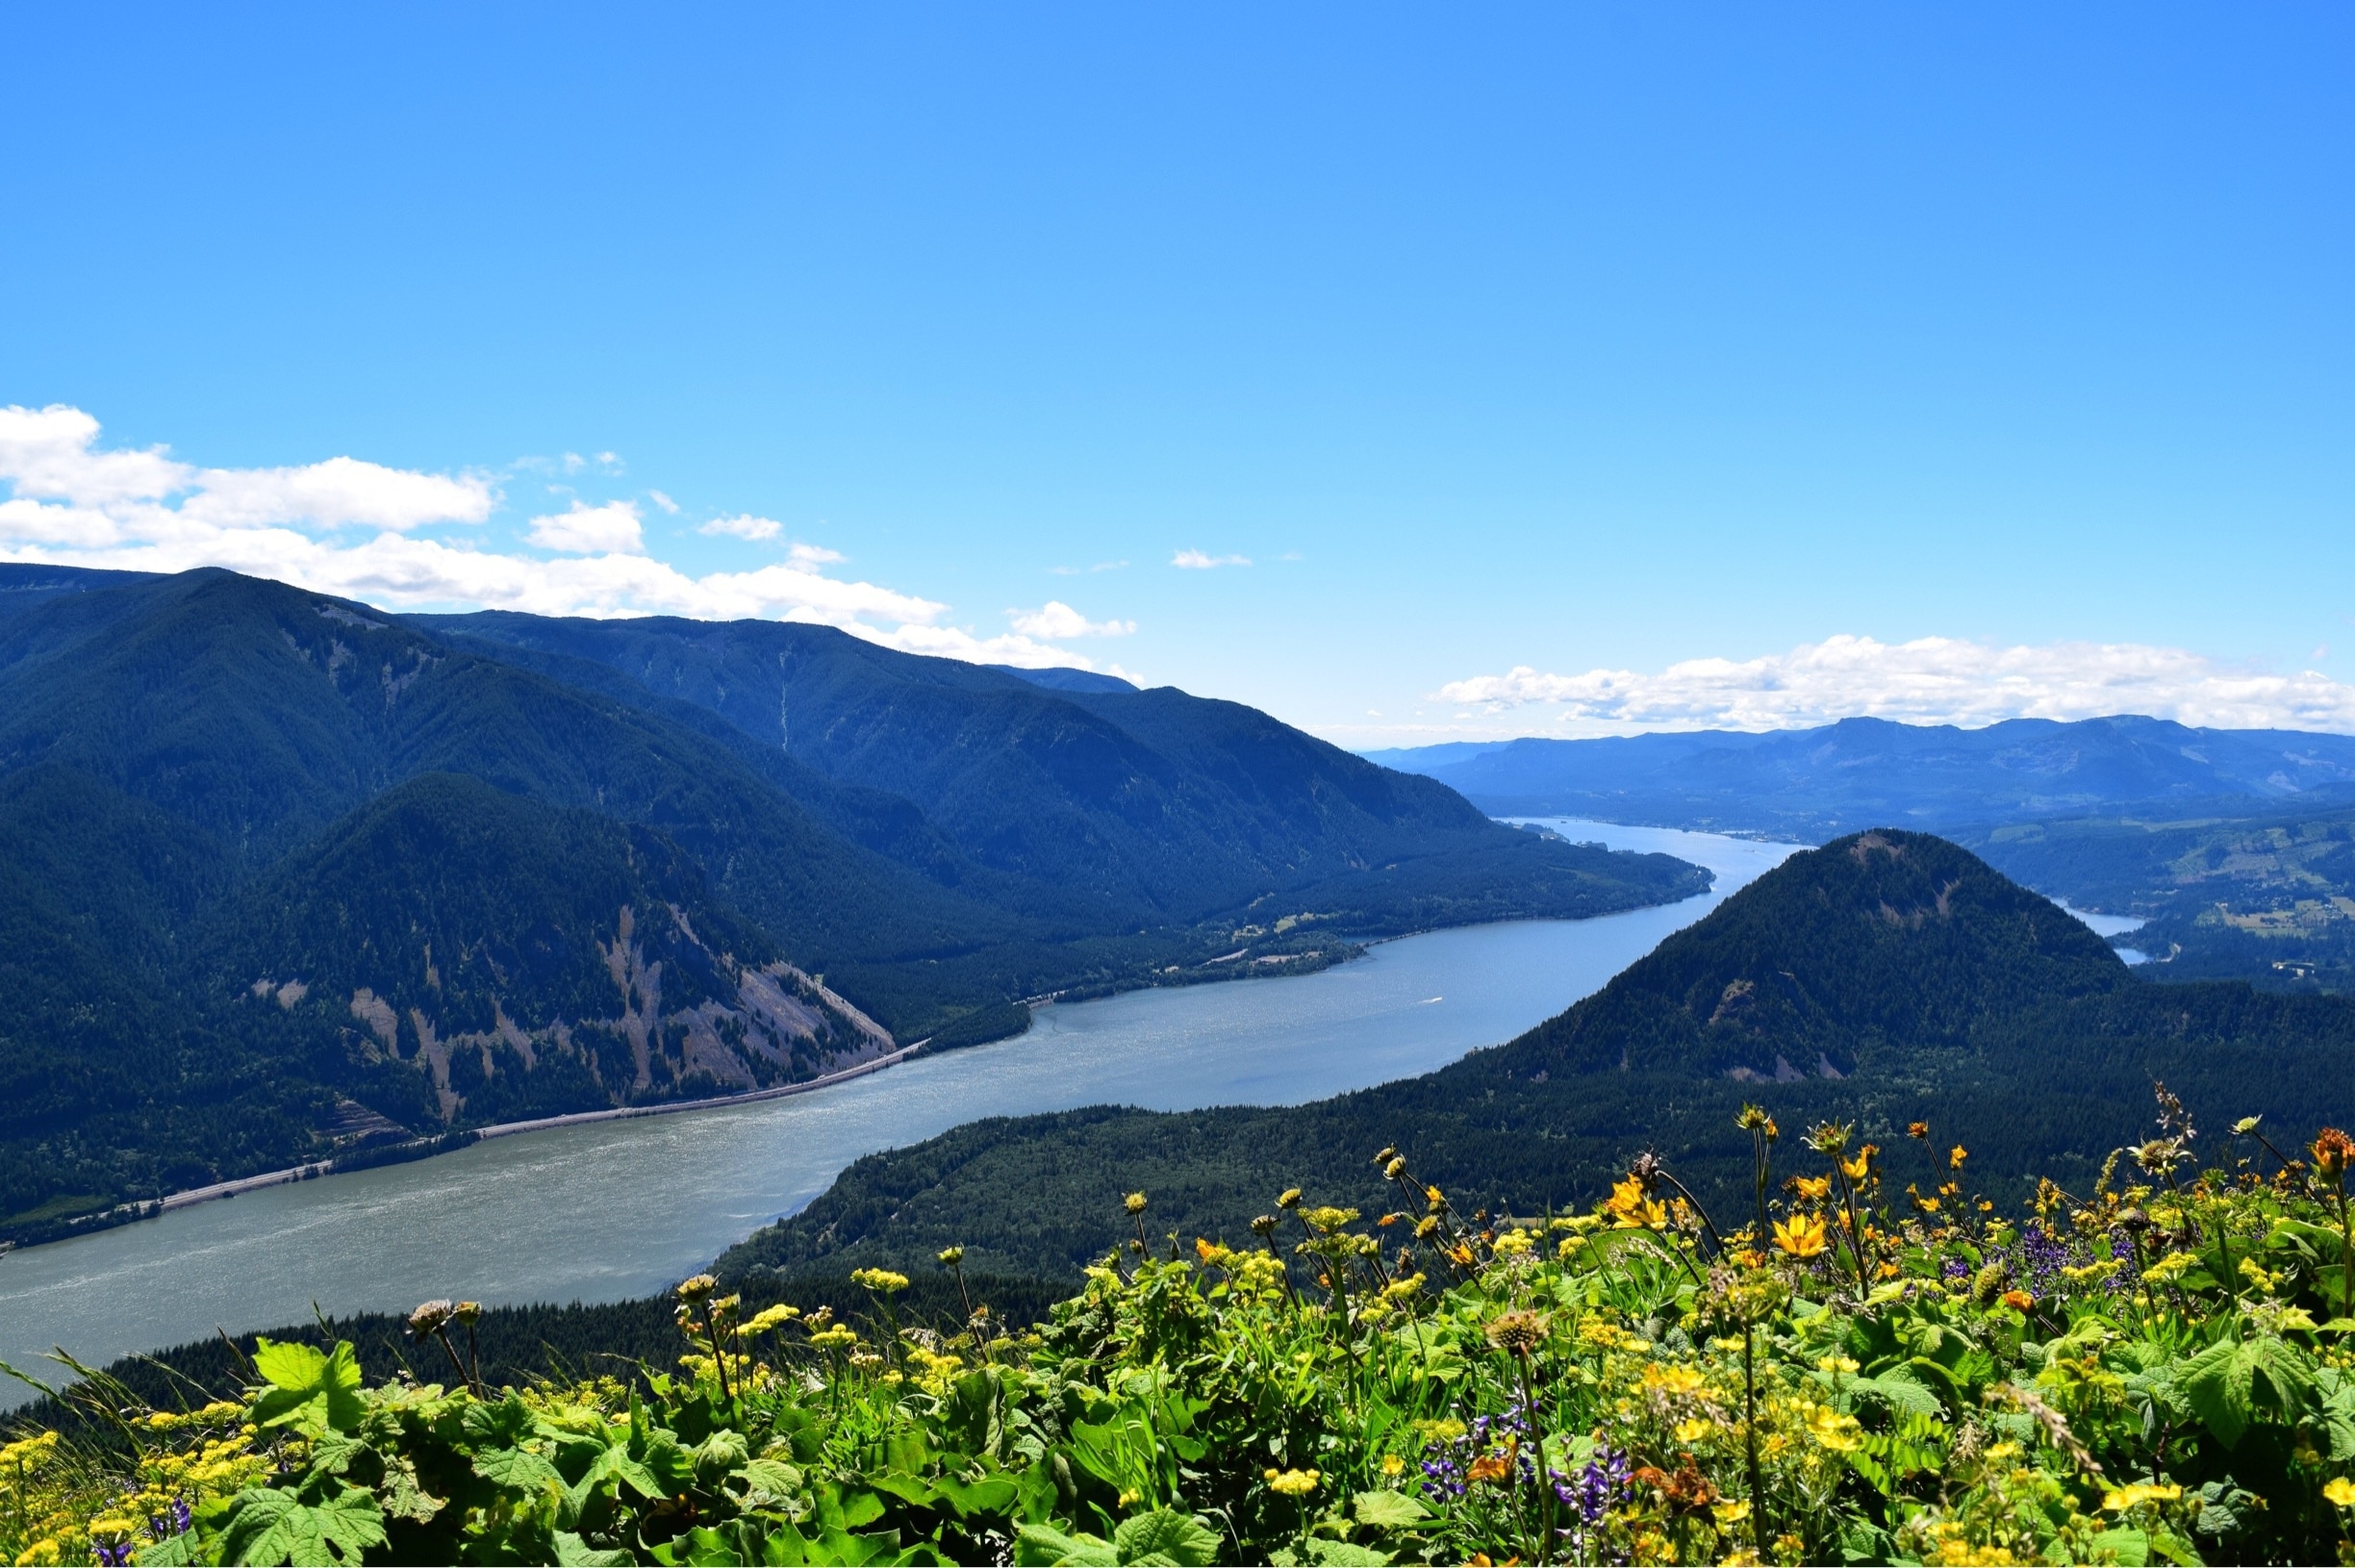 One of the most beautiful hikes I've ever been to. A 6-mi loop trail takes you to the top of the mountain opening up the views to magnificent Columbia river gorge.
#hiking